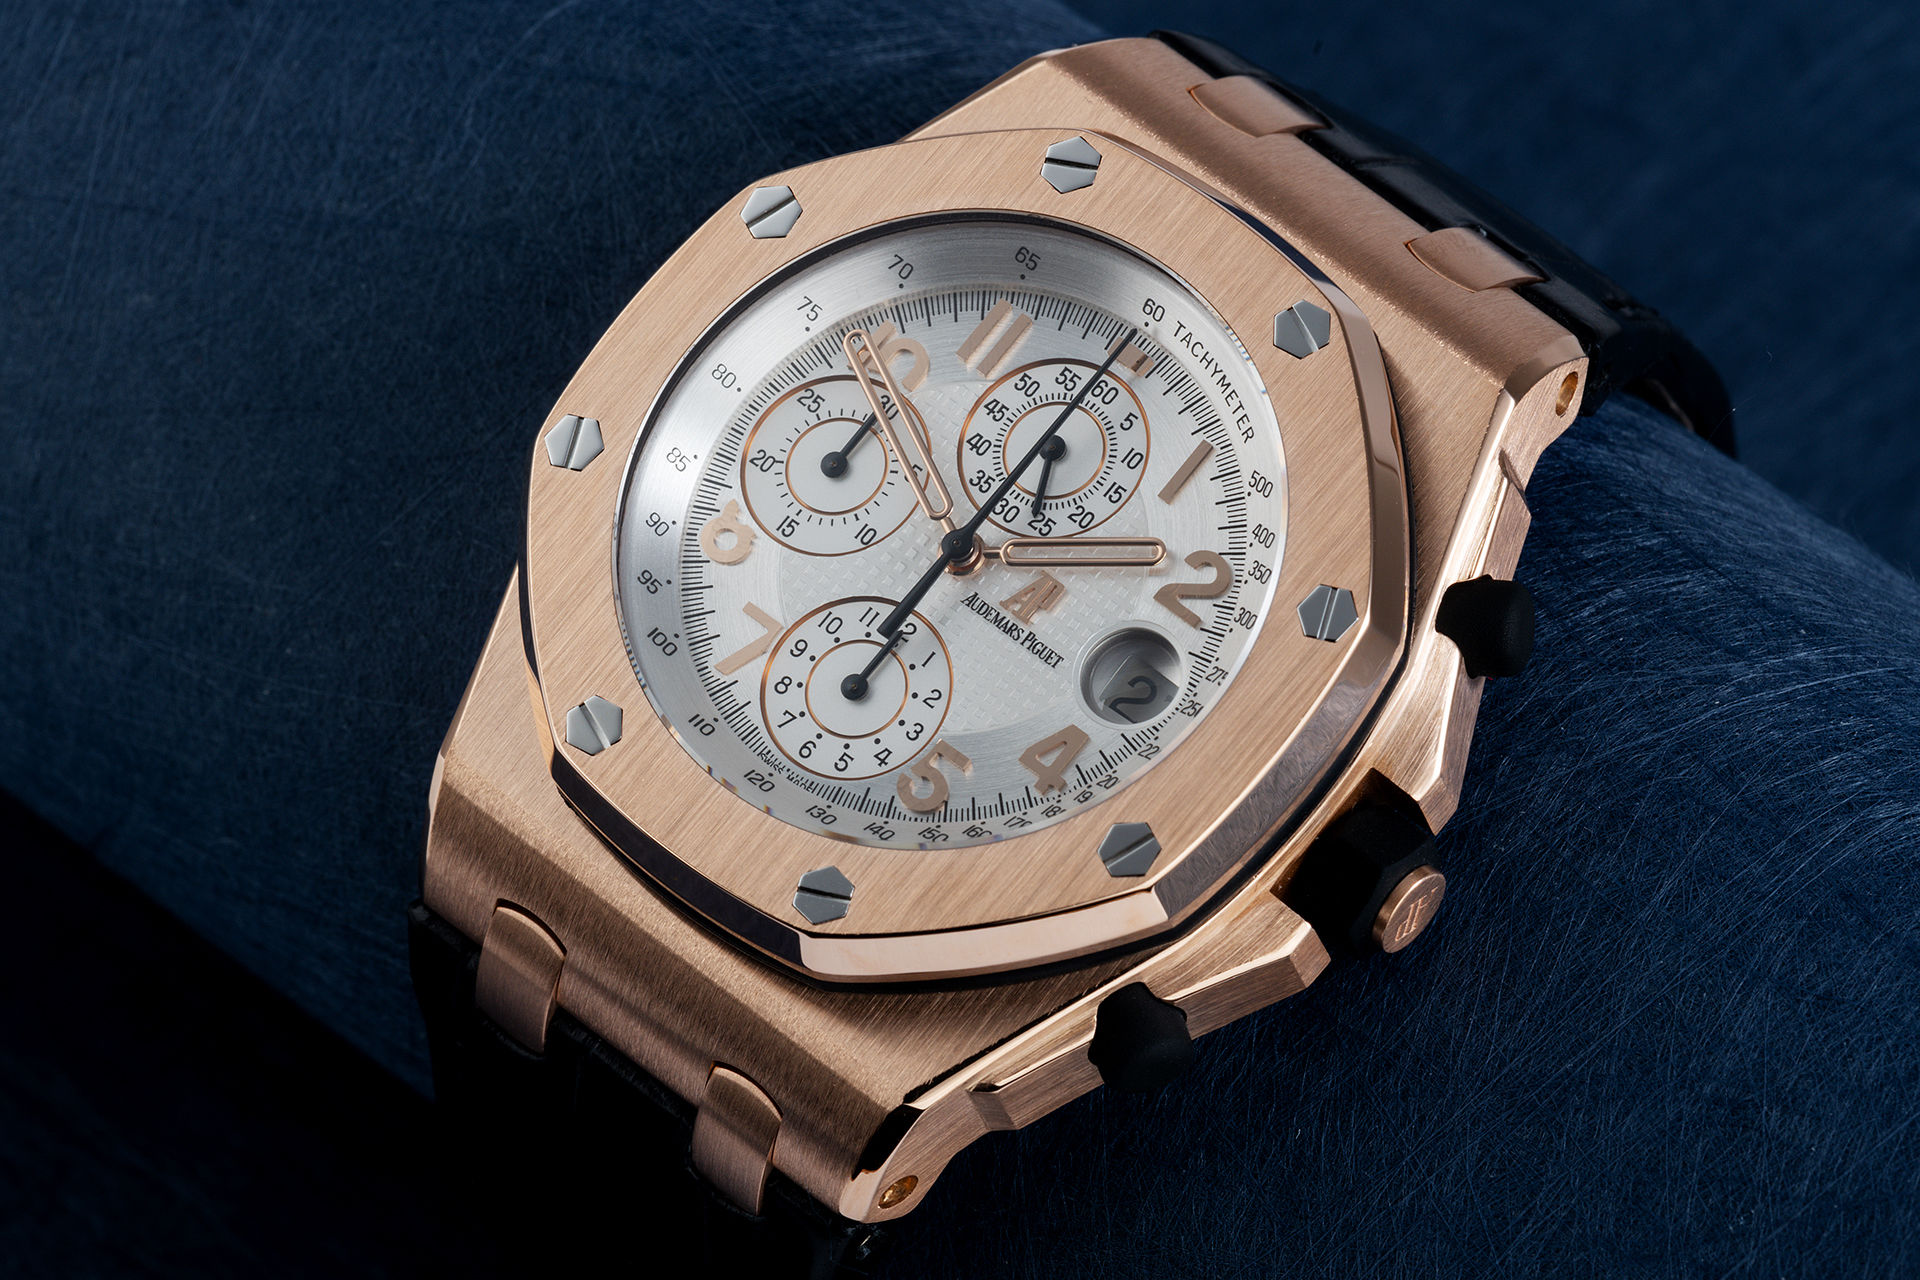 ref 26061OR.OO.D002CR.01 | Limited Edition 'One of 200' | Audemars Piguet Royal Oak Offshore